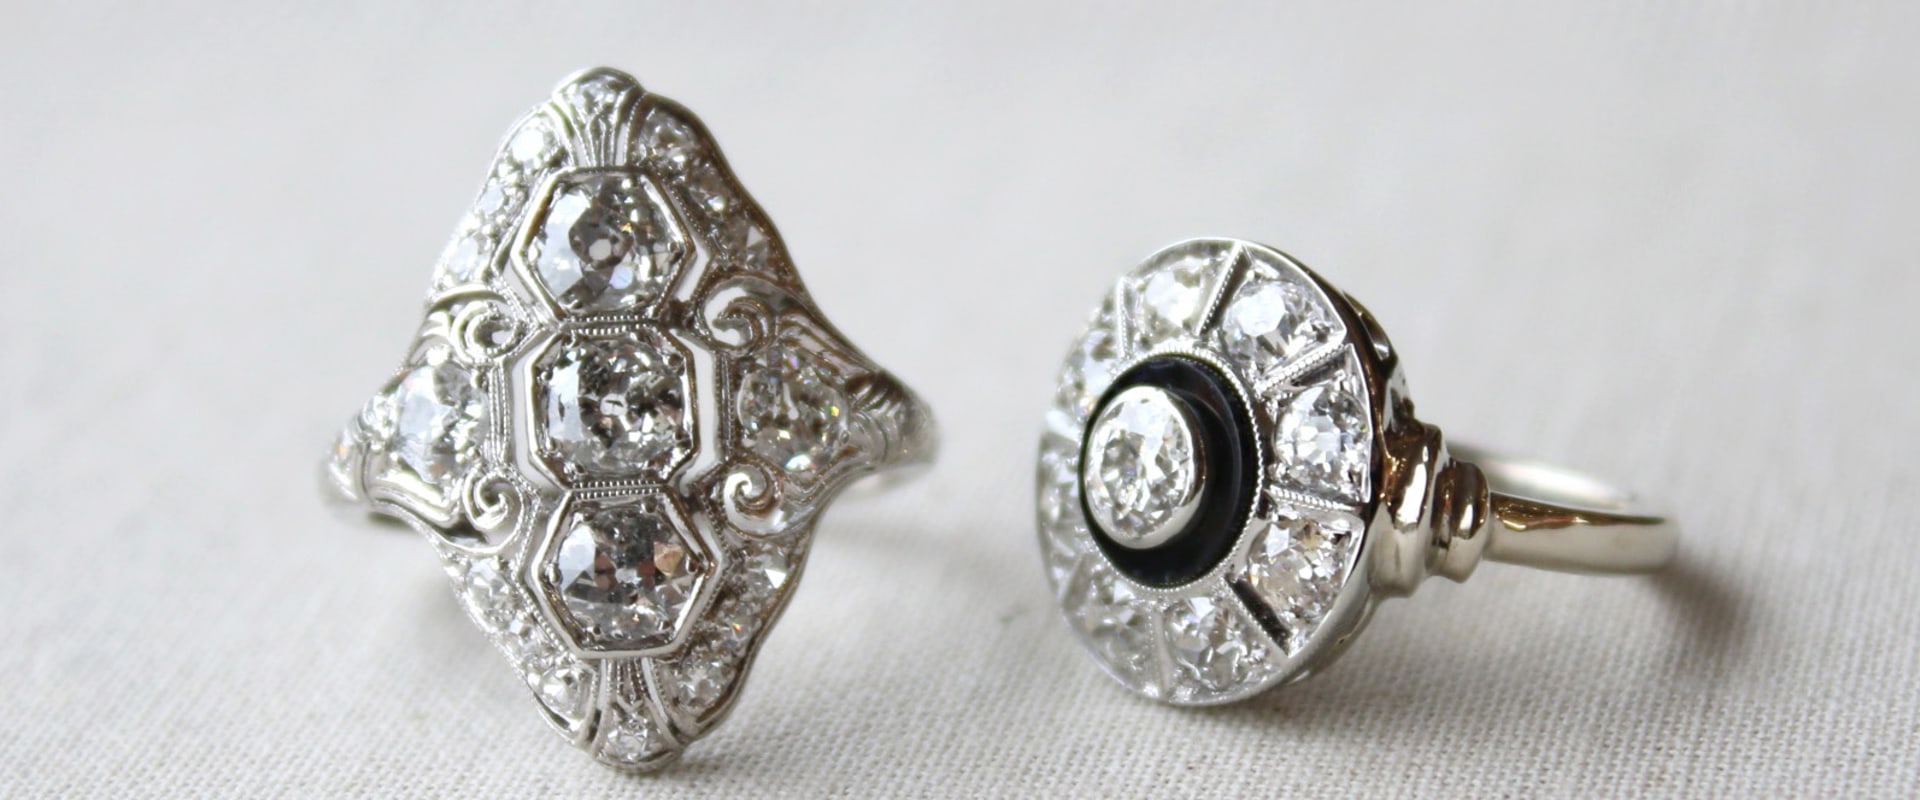 Vintage Engagement Rings: Everything You Need to Know